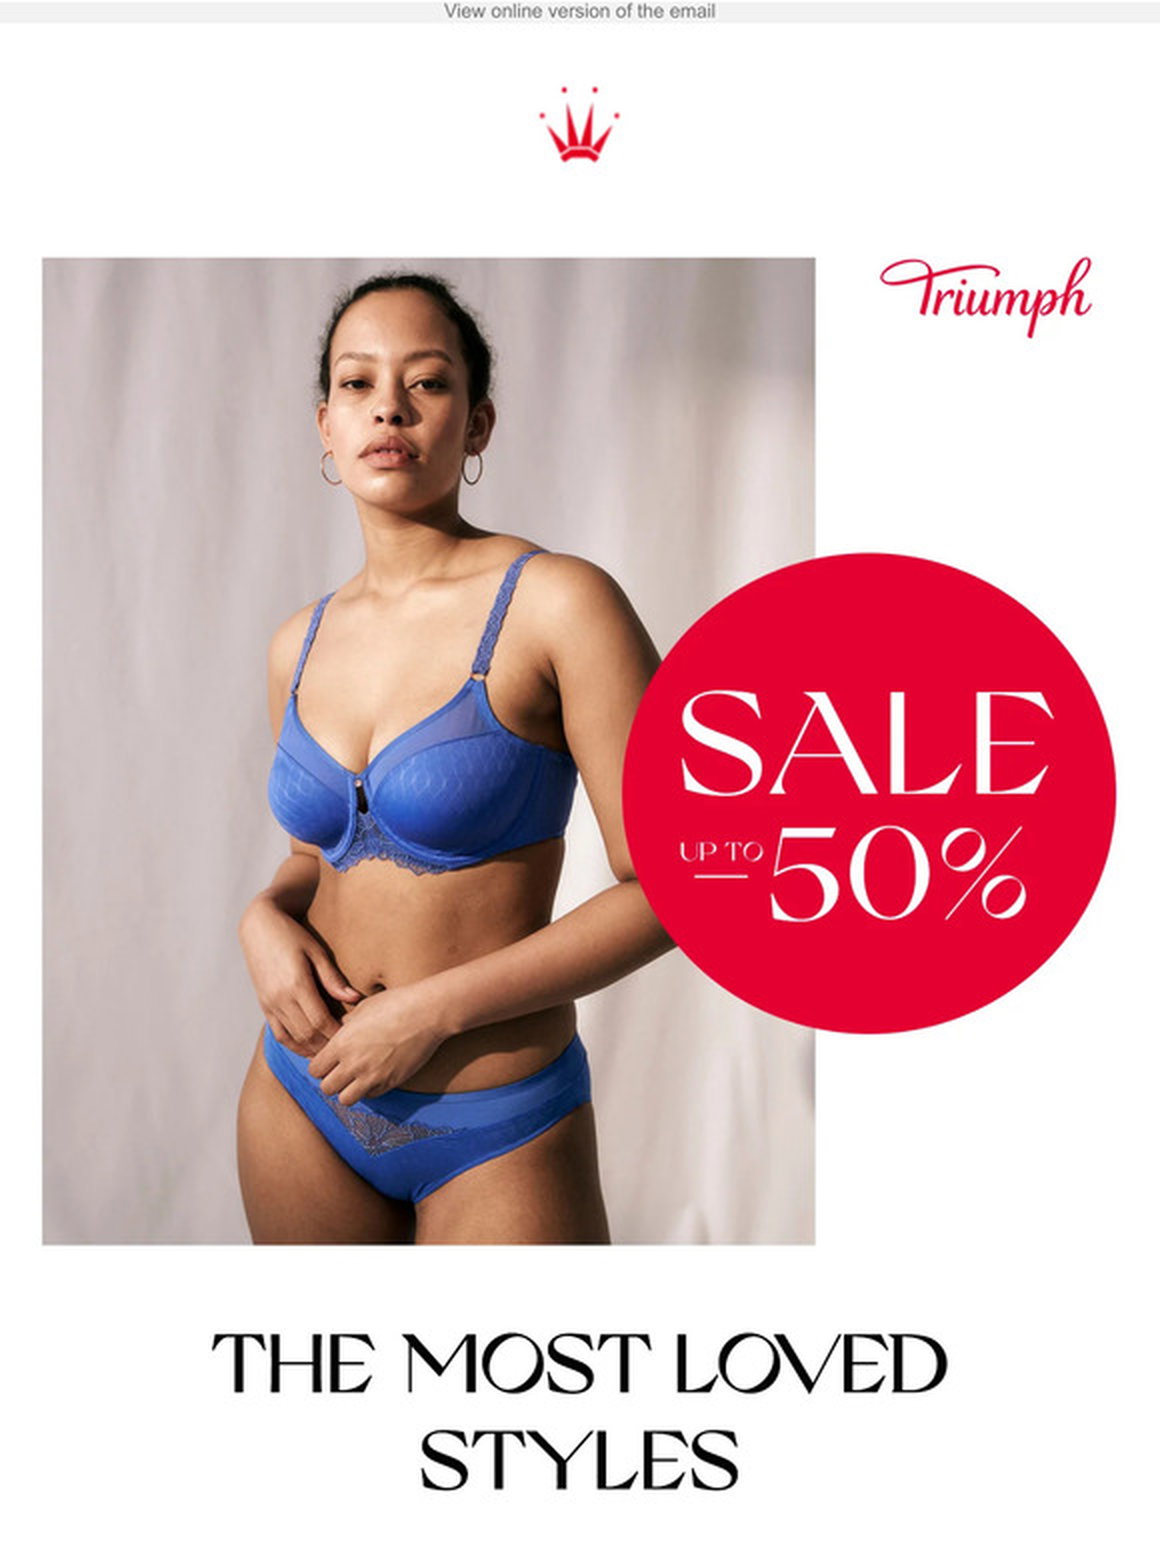 Triumph Email Newsletters: Shop Sales, Discounts, and Coupon Codes